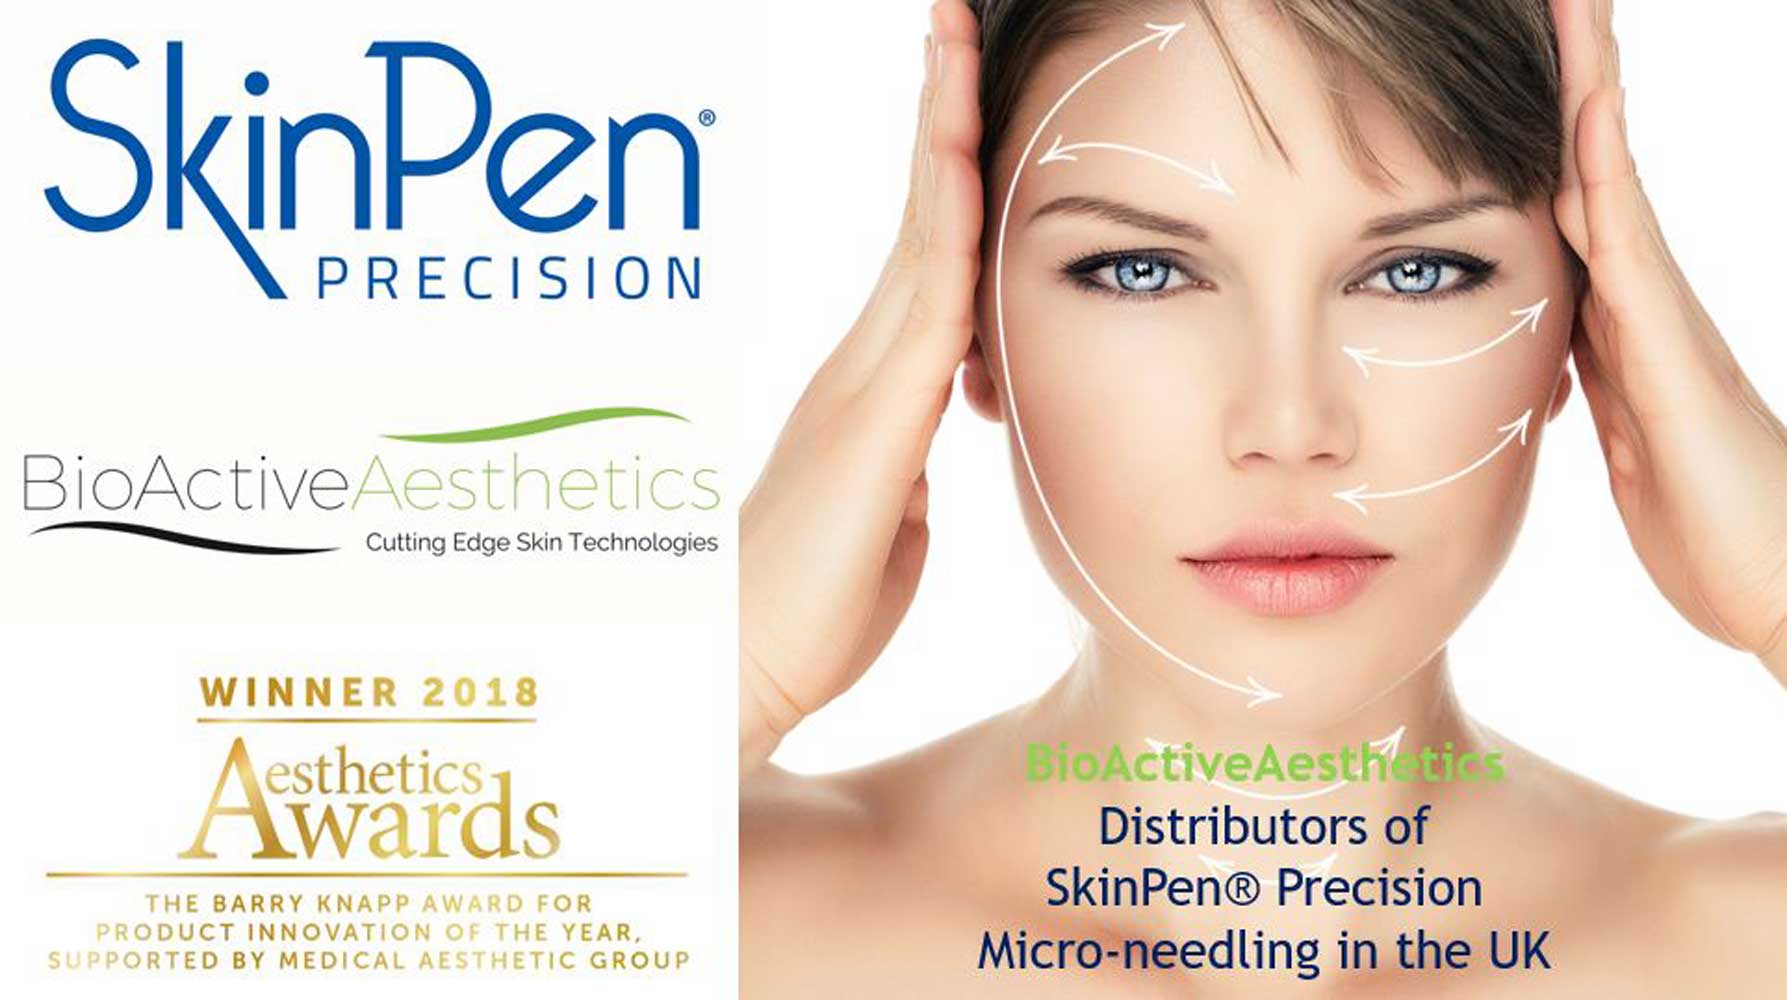 Skinpen Precision (Collagen Induction Therapy) treatment at Amara Aesthetics